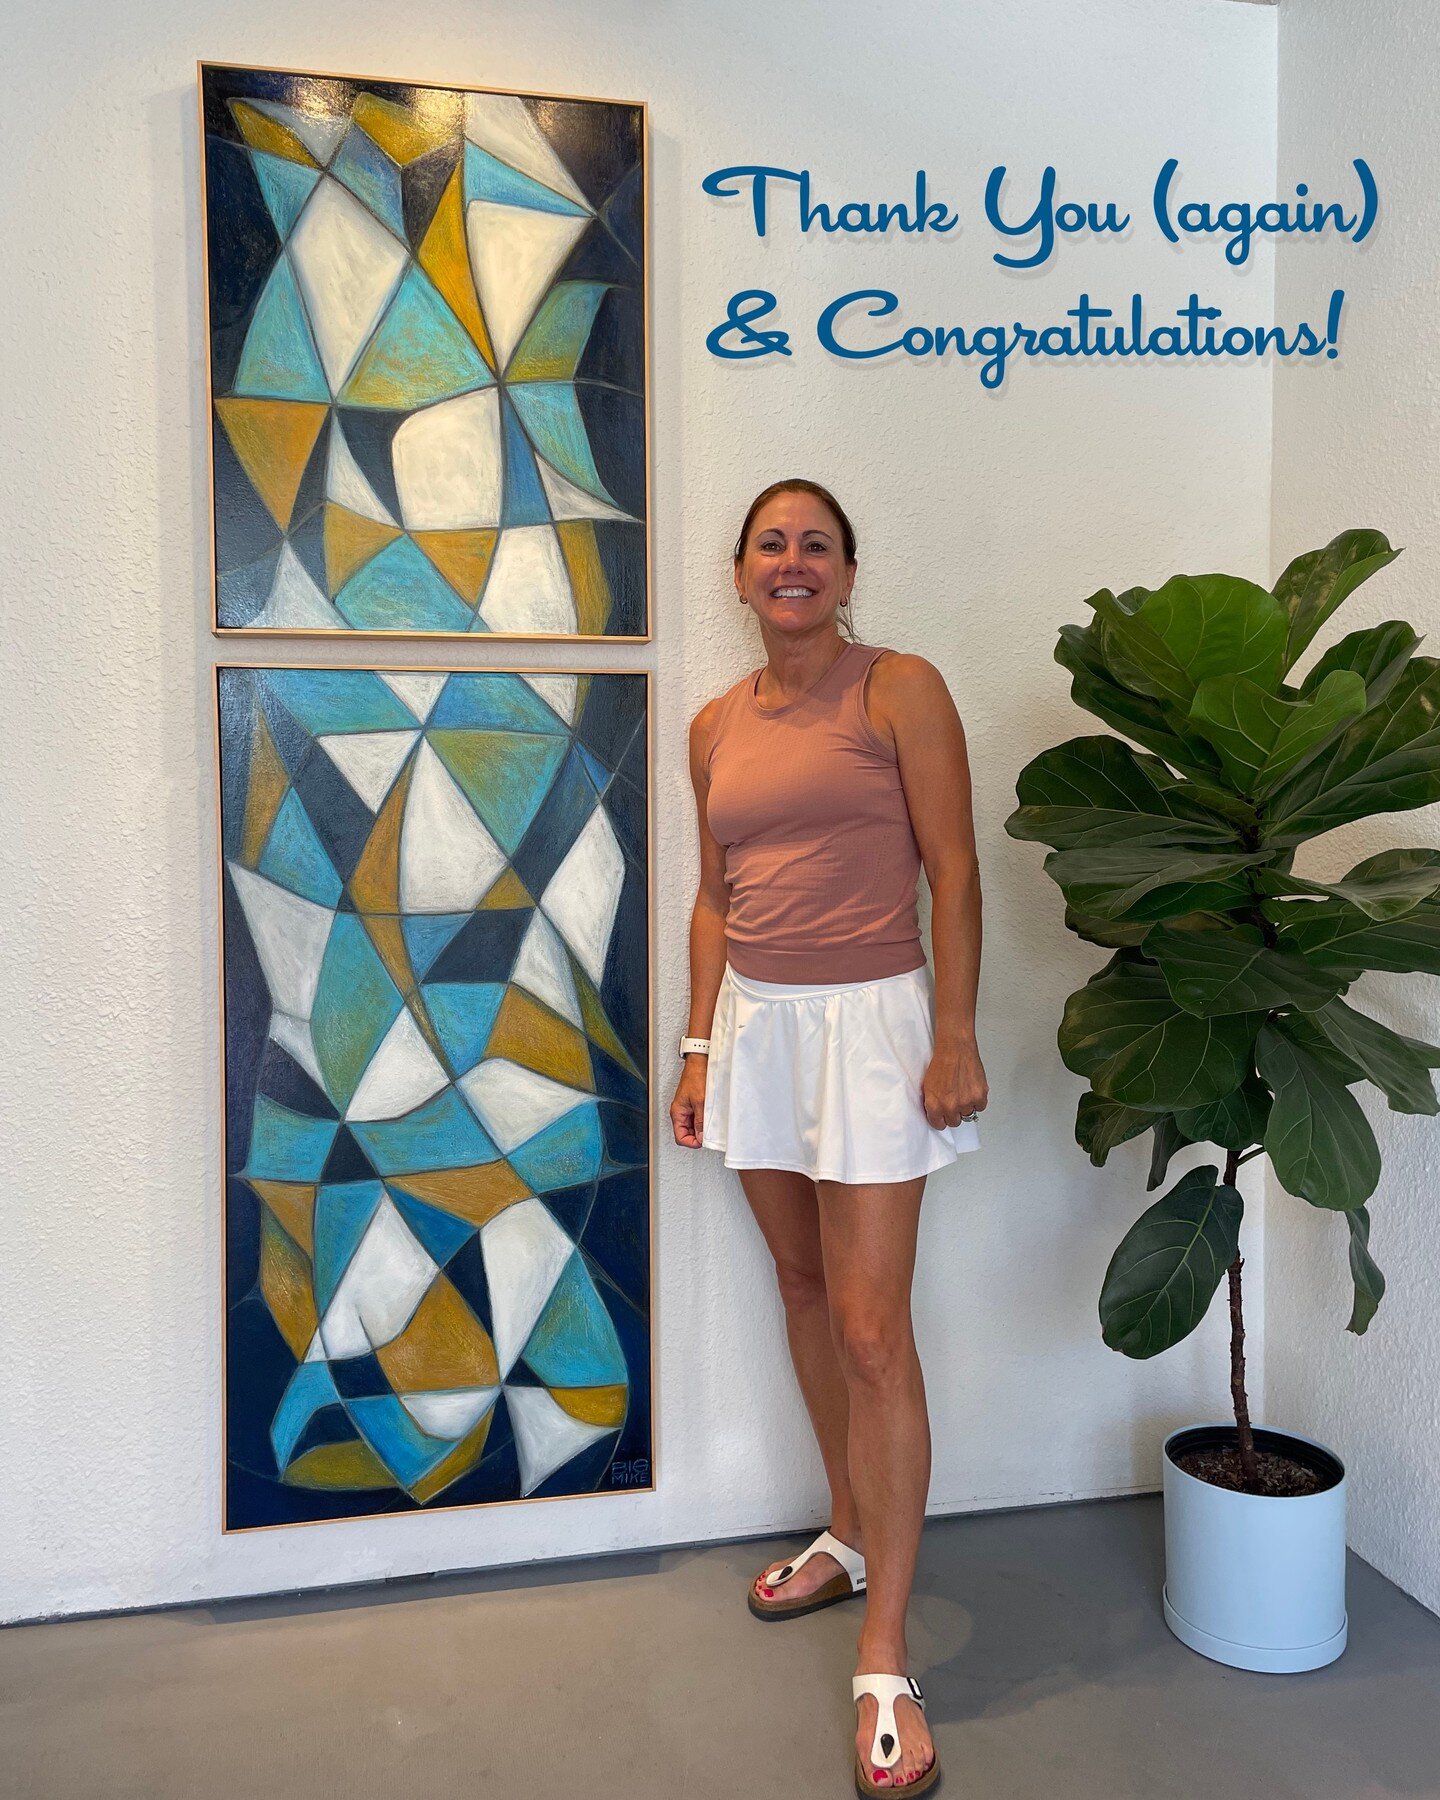 So very Grateful! Thank you (again) and Congratulations to the delightful Donna of La Quinta on her acquisition of another one of my favorite pieces, Cosmic Cliffs. It has found a stunningly beautiful home in Griffin Ranch Estates! Thanks again Donna